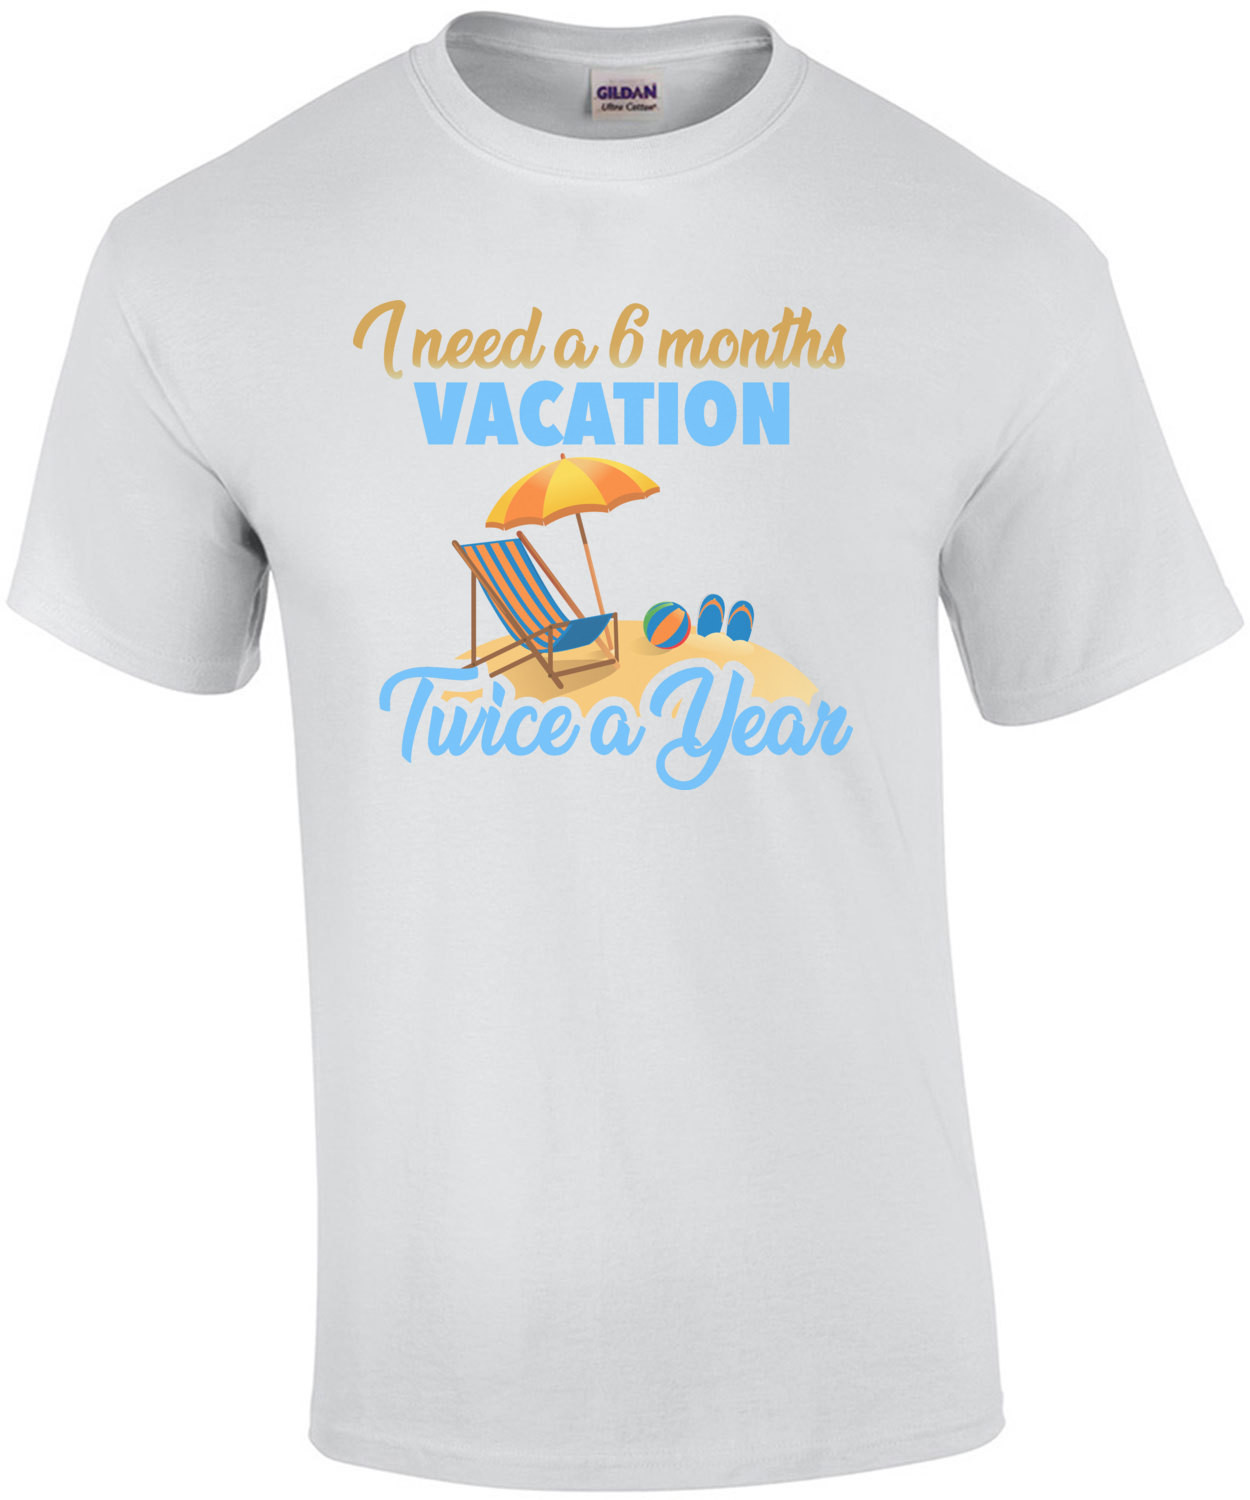 I need a 6 months vacation - twice a year - funny t-shirt